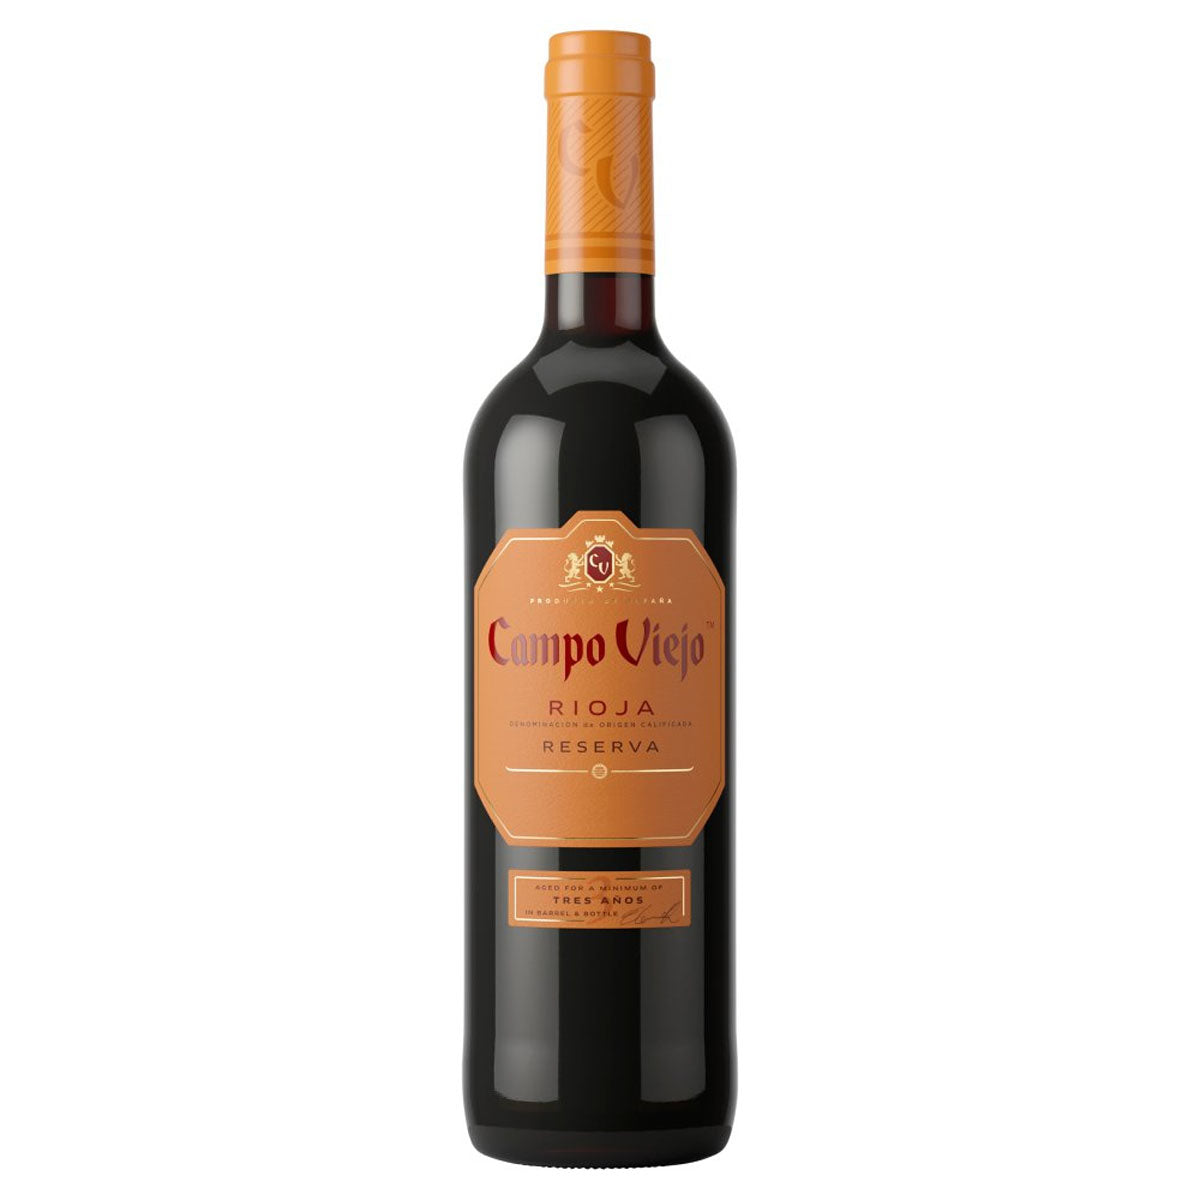 A bottle of Campo Viejo - Rioja Reserva Red Wine (13.5% ABV) - 750ml with an orange label.